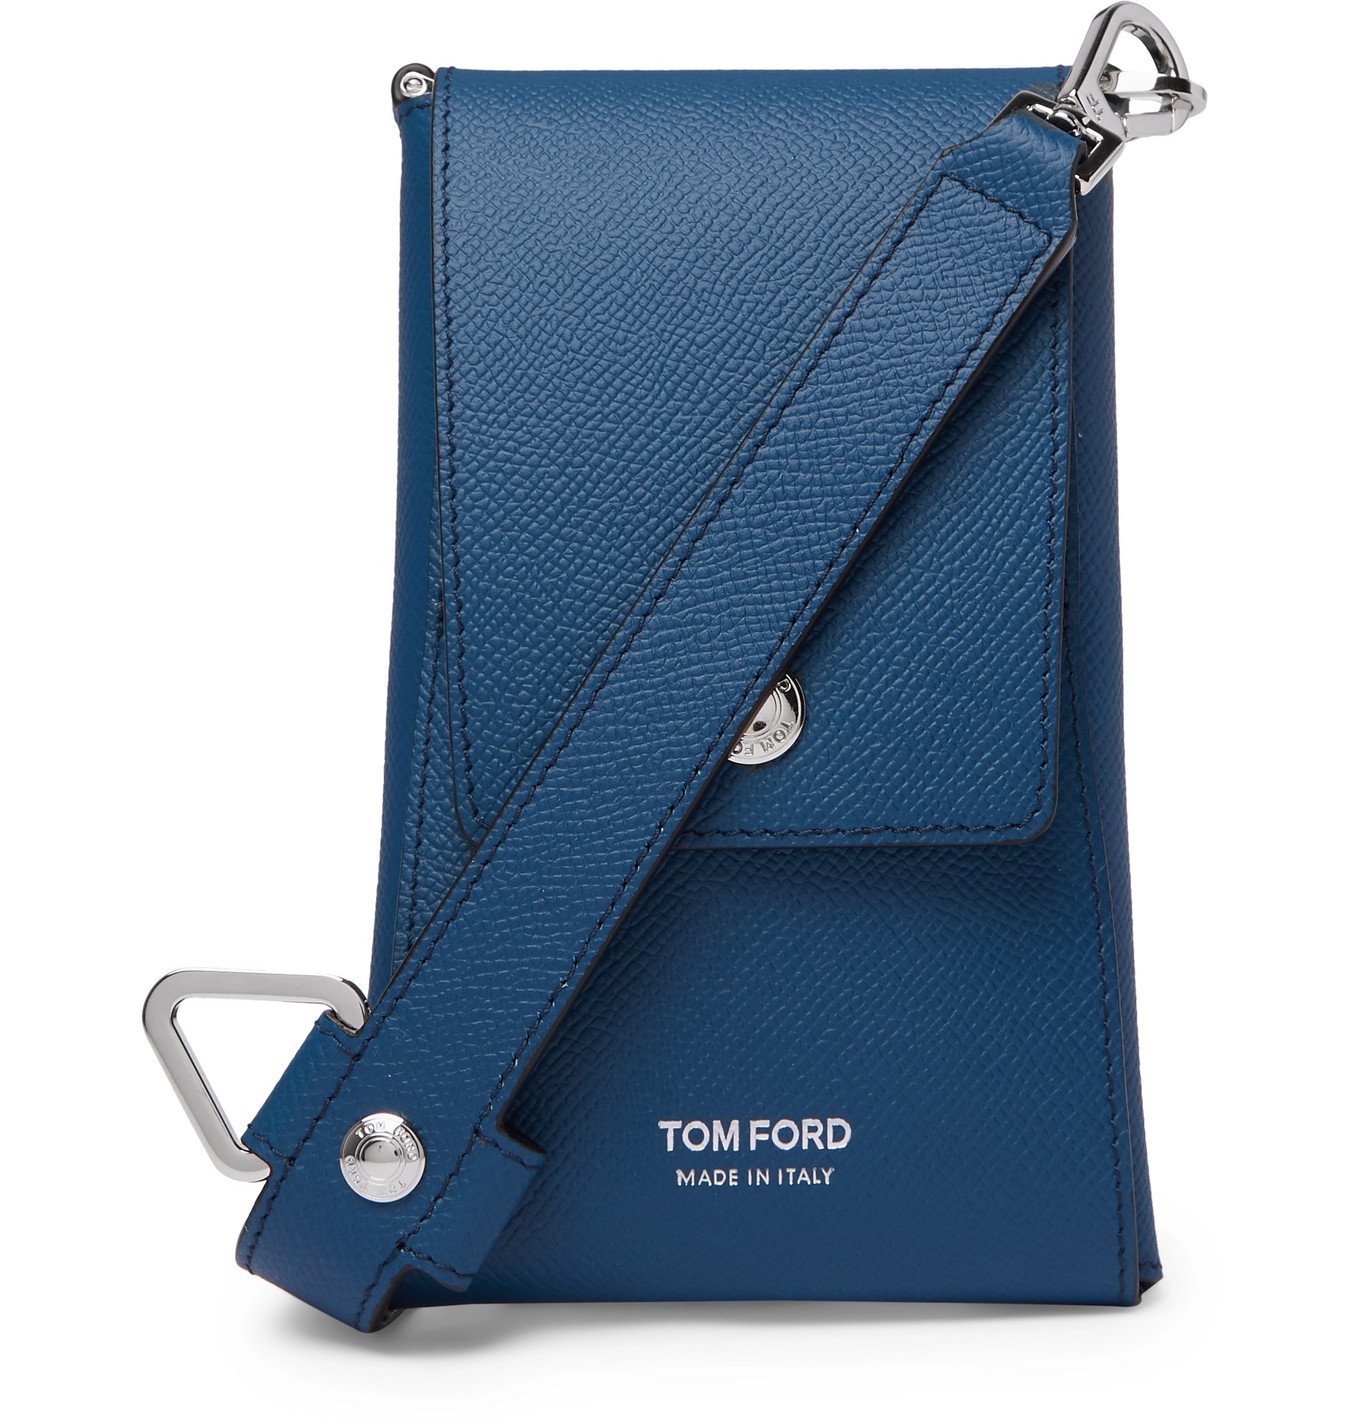 TOM FORD - Full-Grain Leather Pouch - Blue TOM FORD